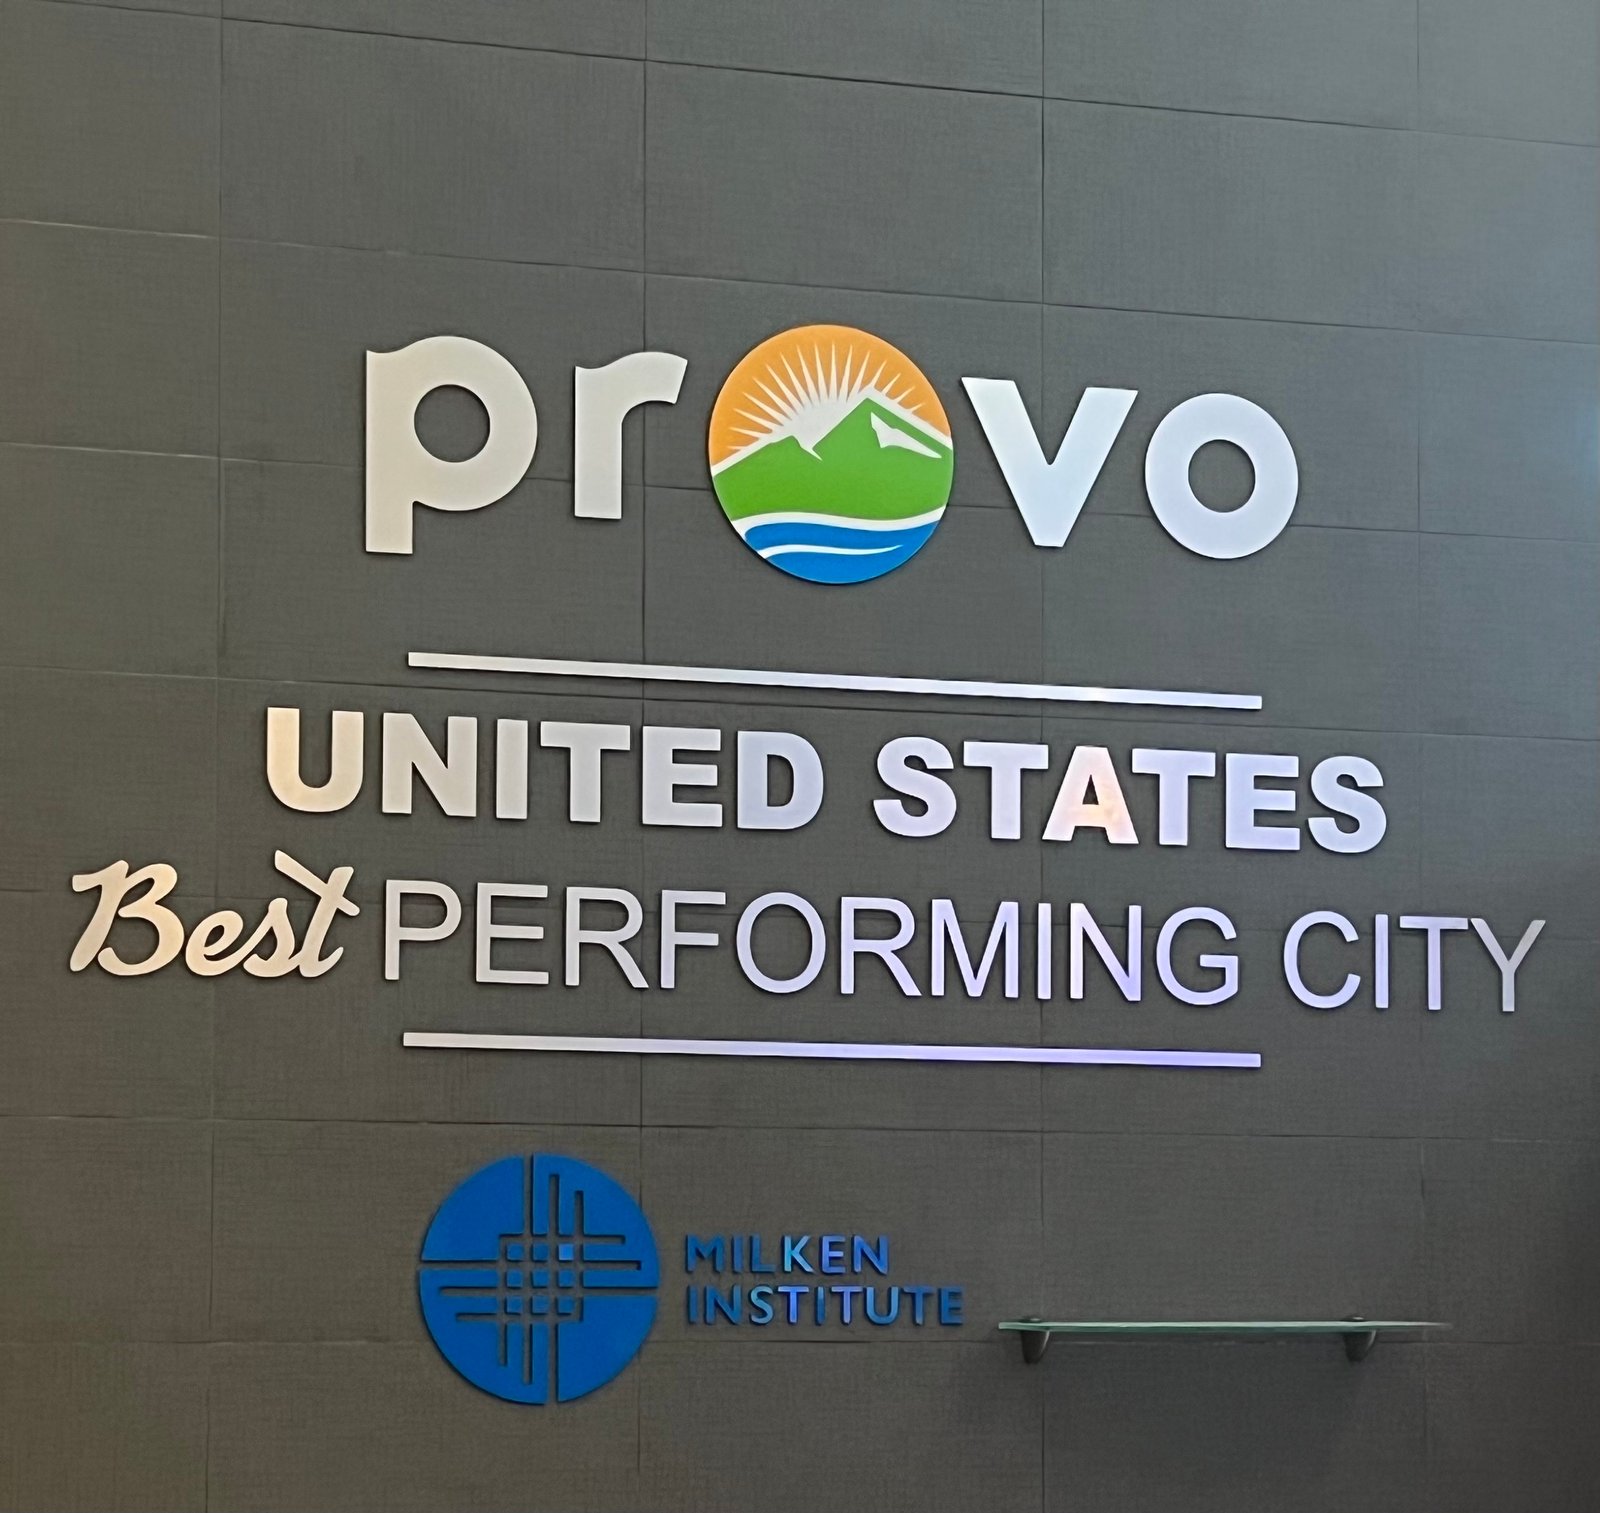 Photo I took at the Provo Recreation Center where the Best Performing city sign is on the wall in the lobby. Provo wins again, the best performing city 3 years in a row! 